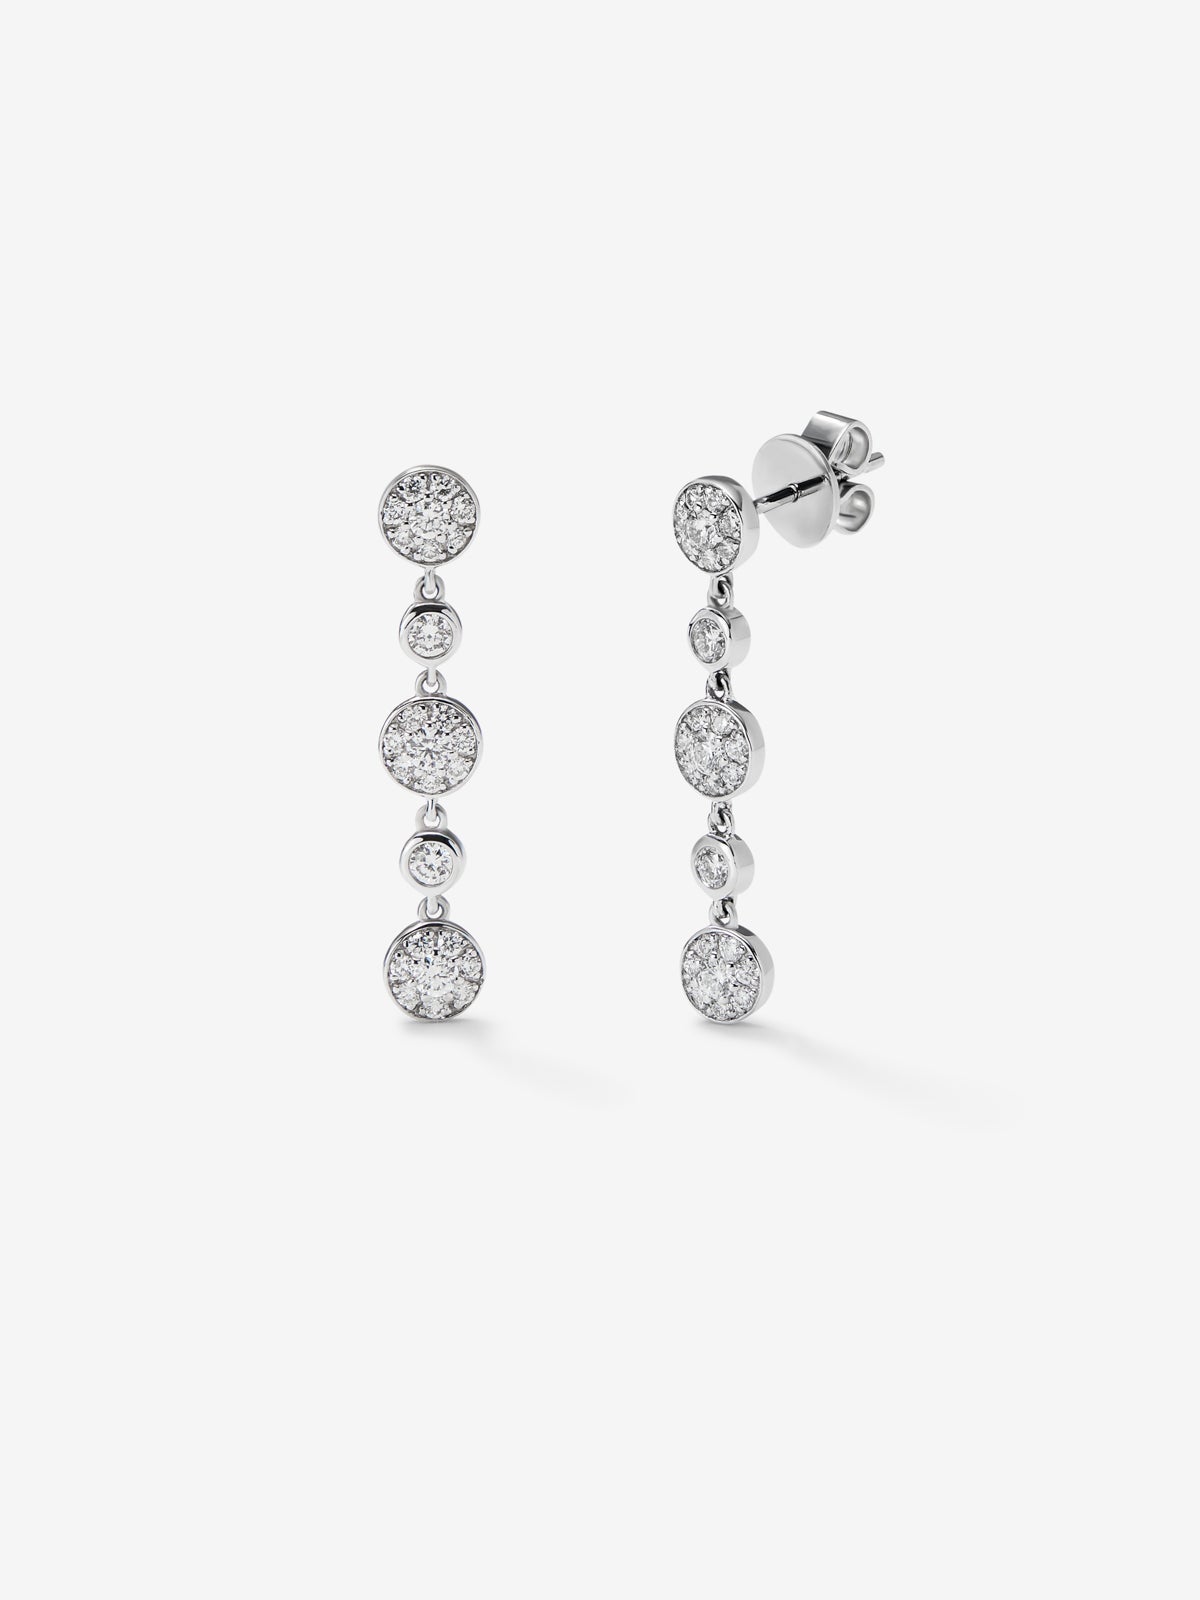 18kt white gold long earrings with diamond-filled circular motifs.